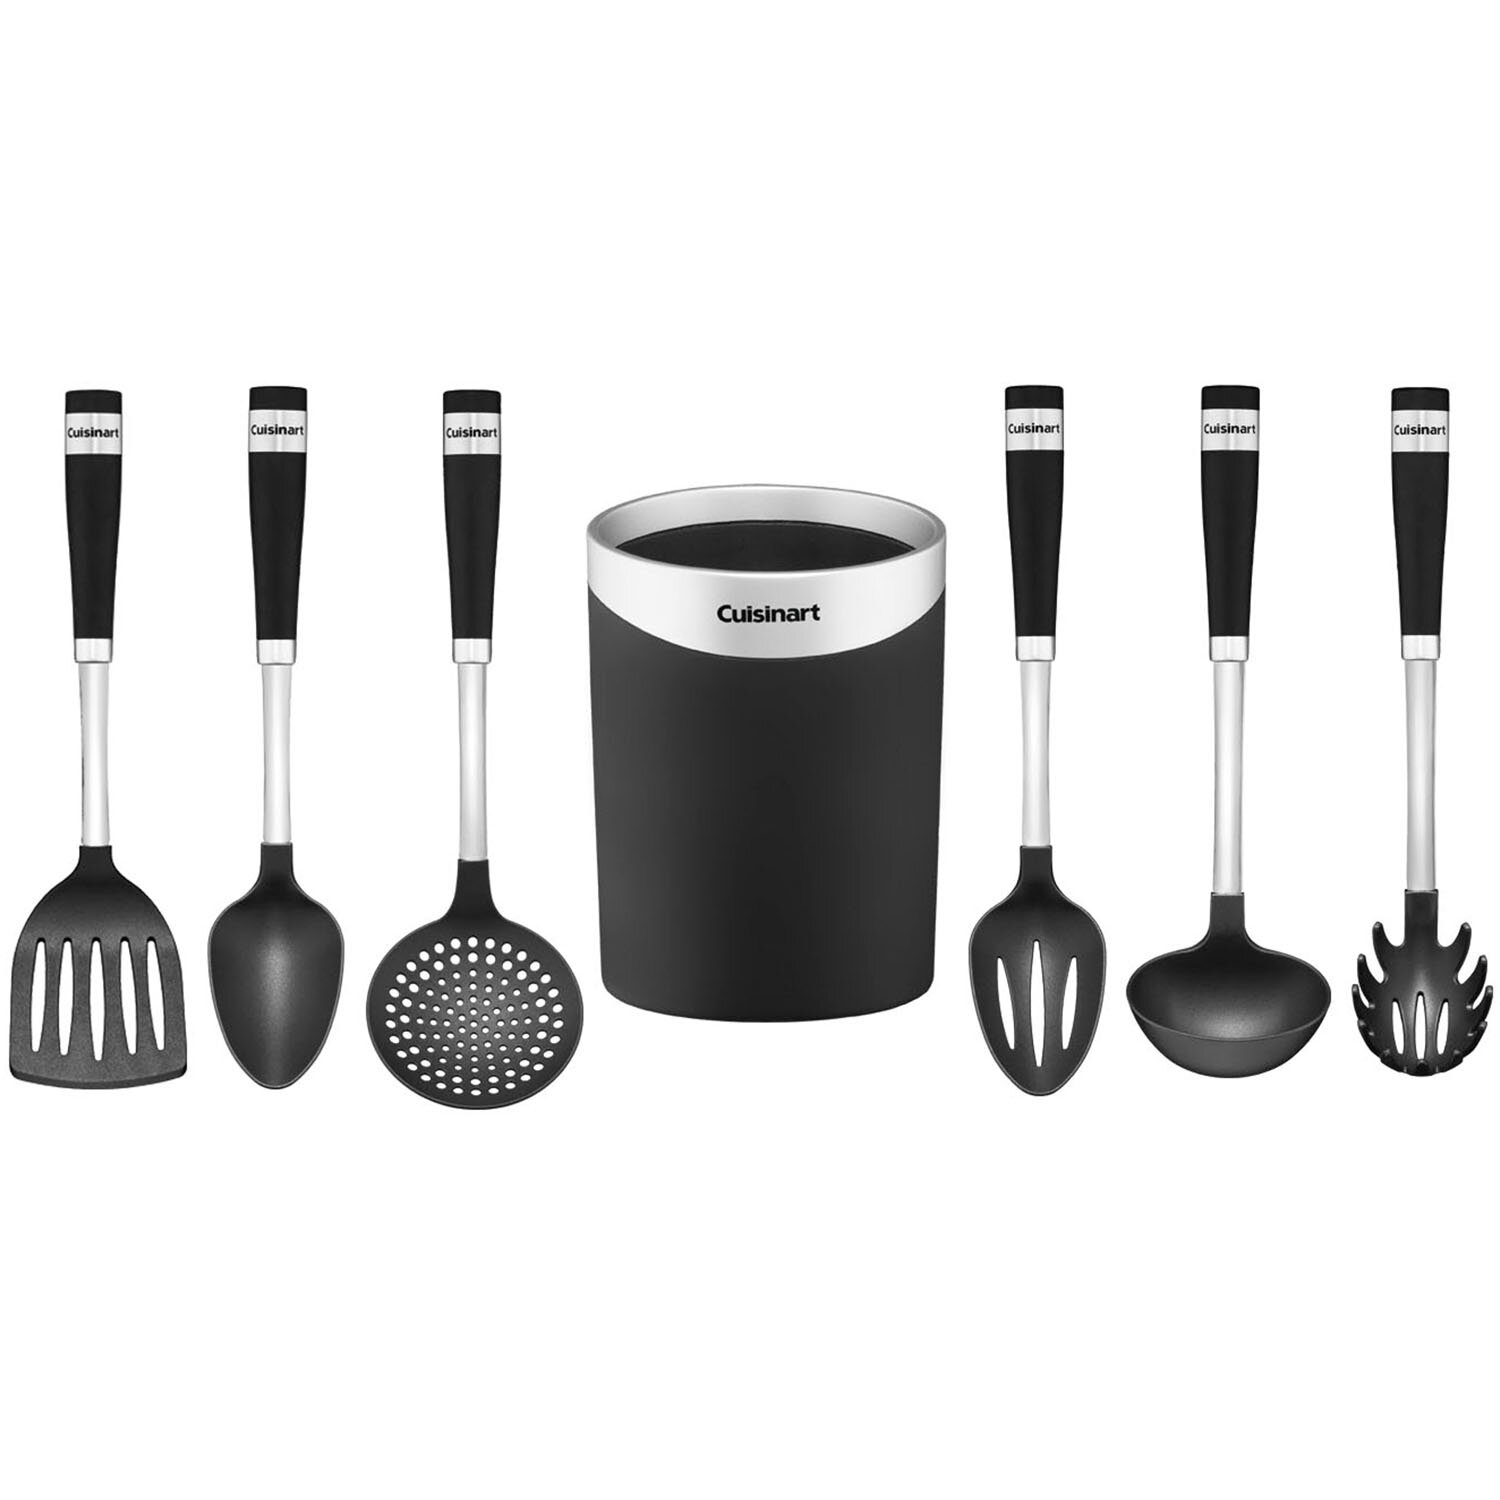 25 Cooking Utensils 1790 Stainless Steel Kitchen Utensil Set Nonstick Utensils Cookware Set with Spatula Ideal for College Students Tool Set Gift 